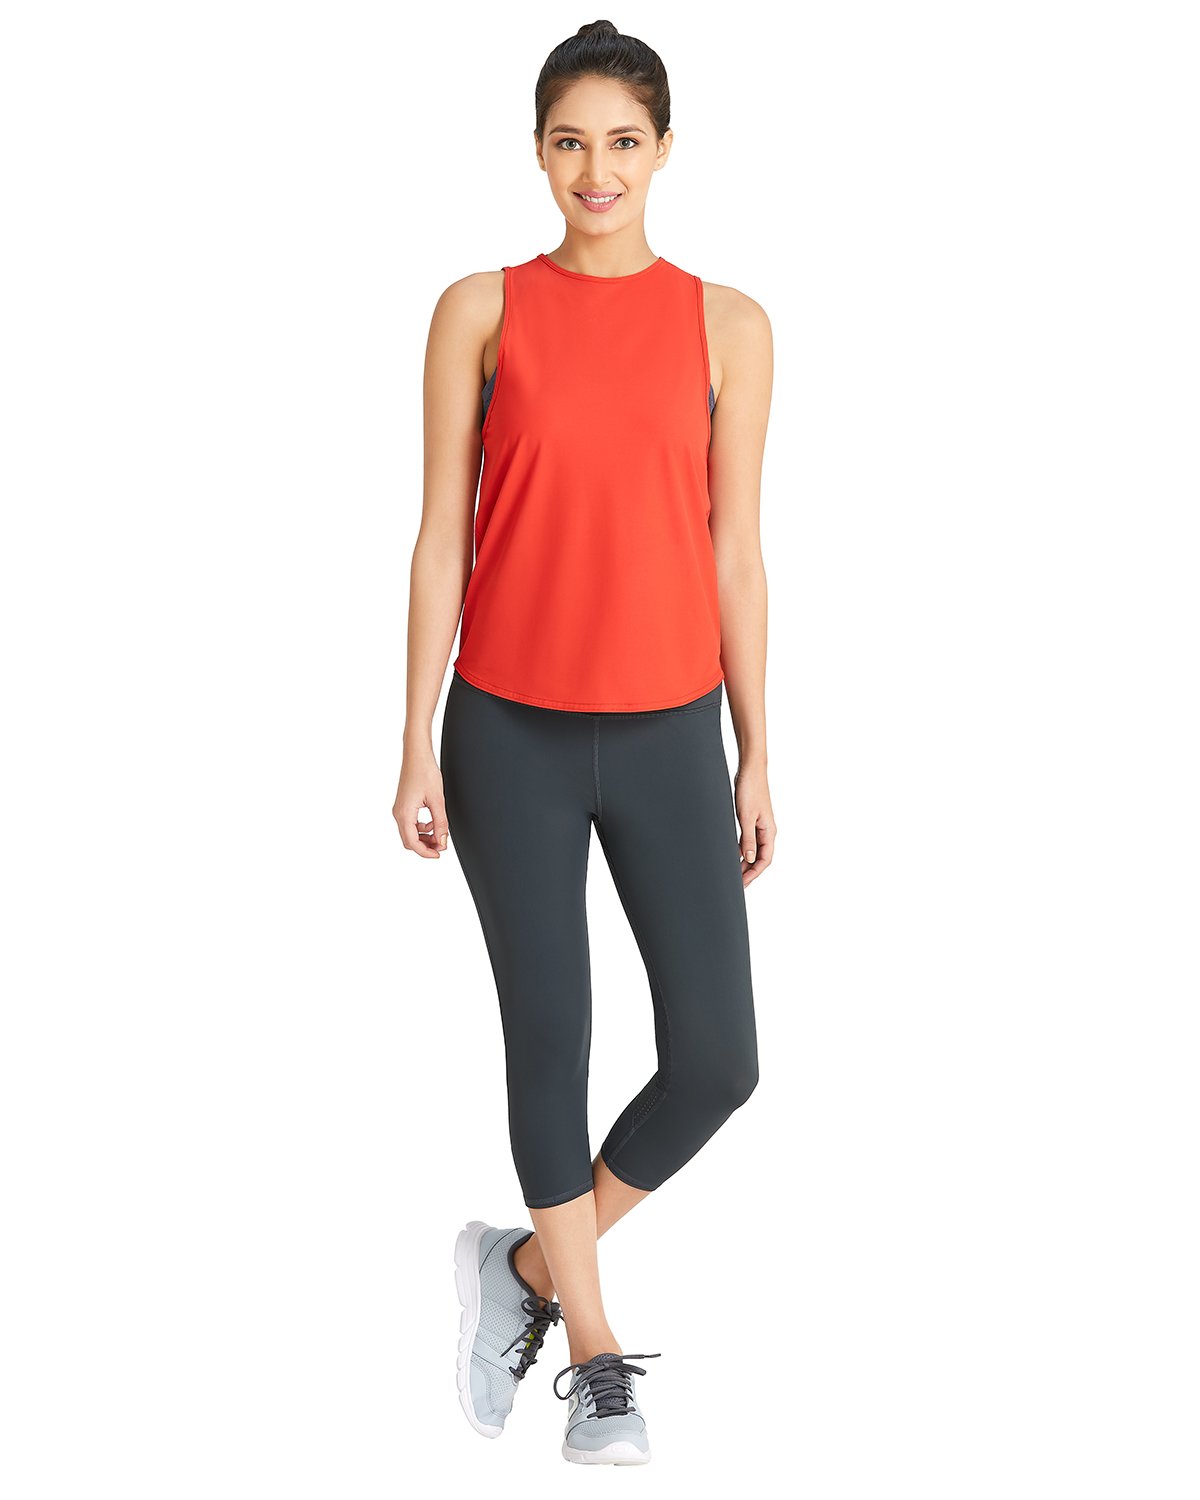 Smooth and Seamless Fitness Tank Top - Molten Lava